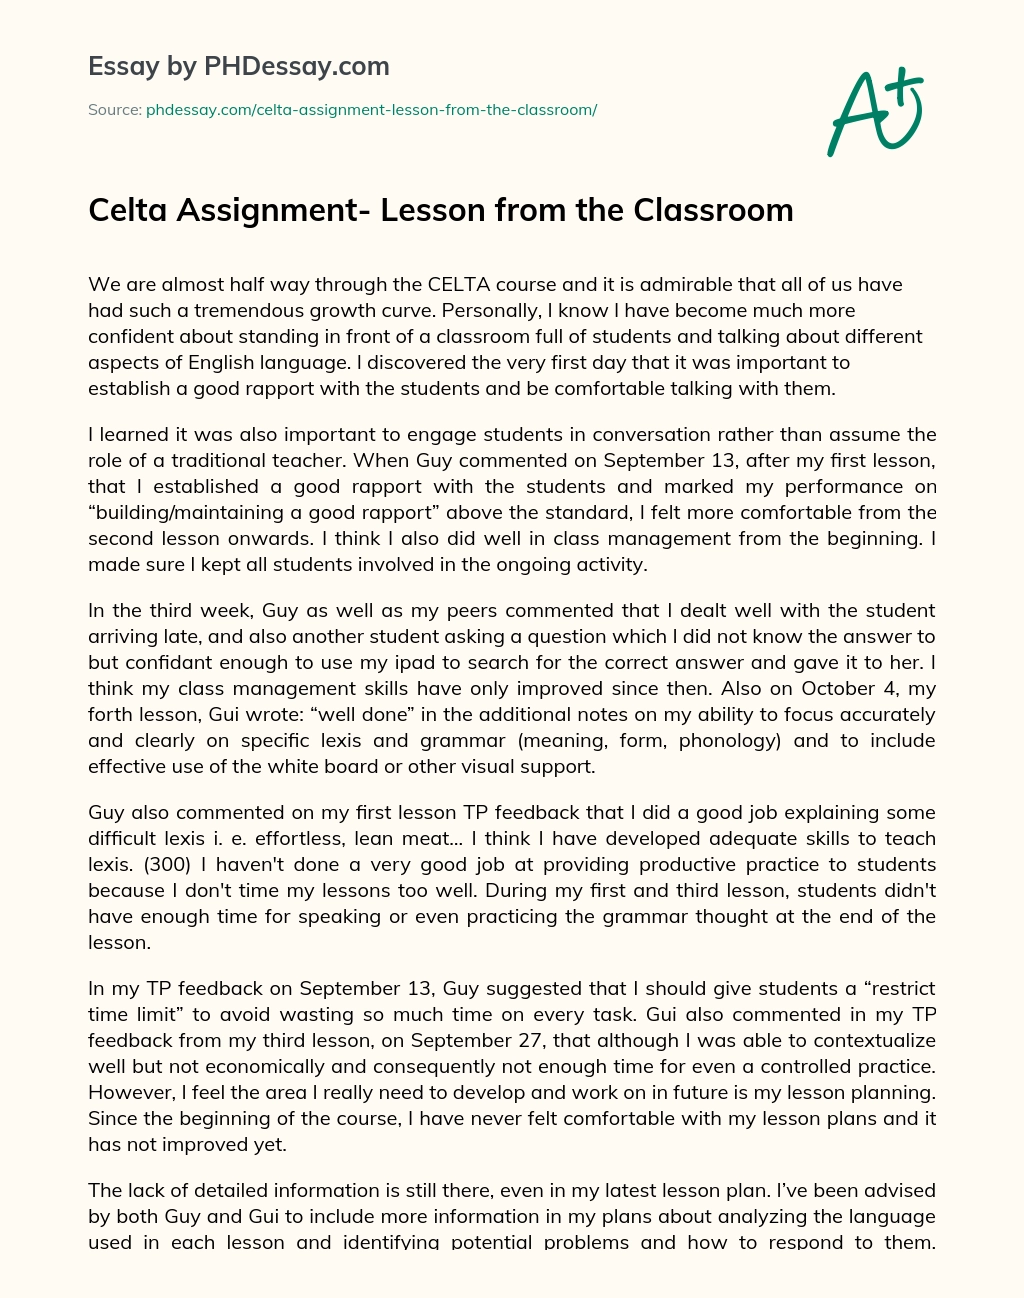 Celta Assignment- Lesson from the Classroom essay